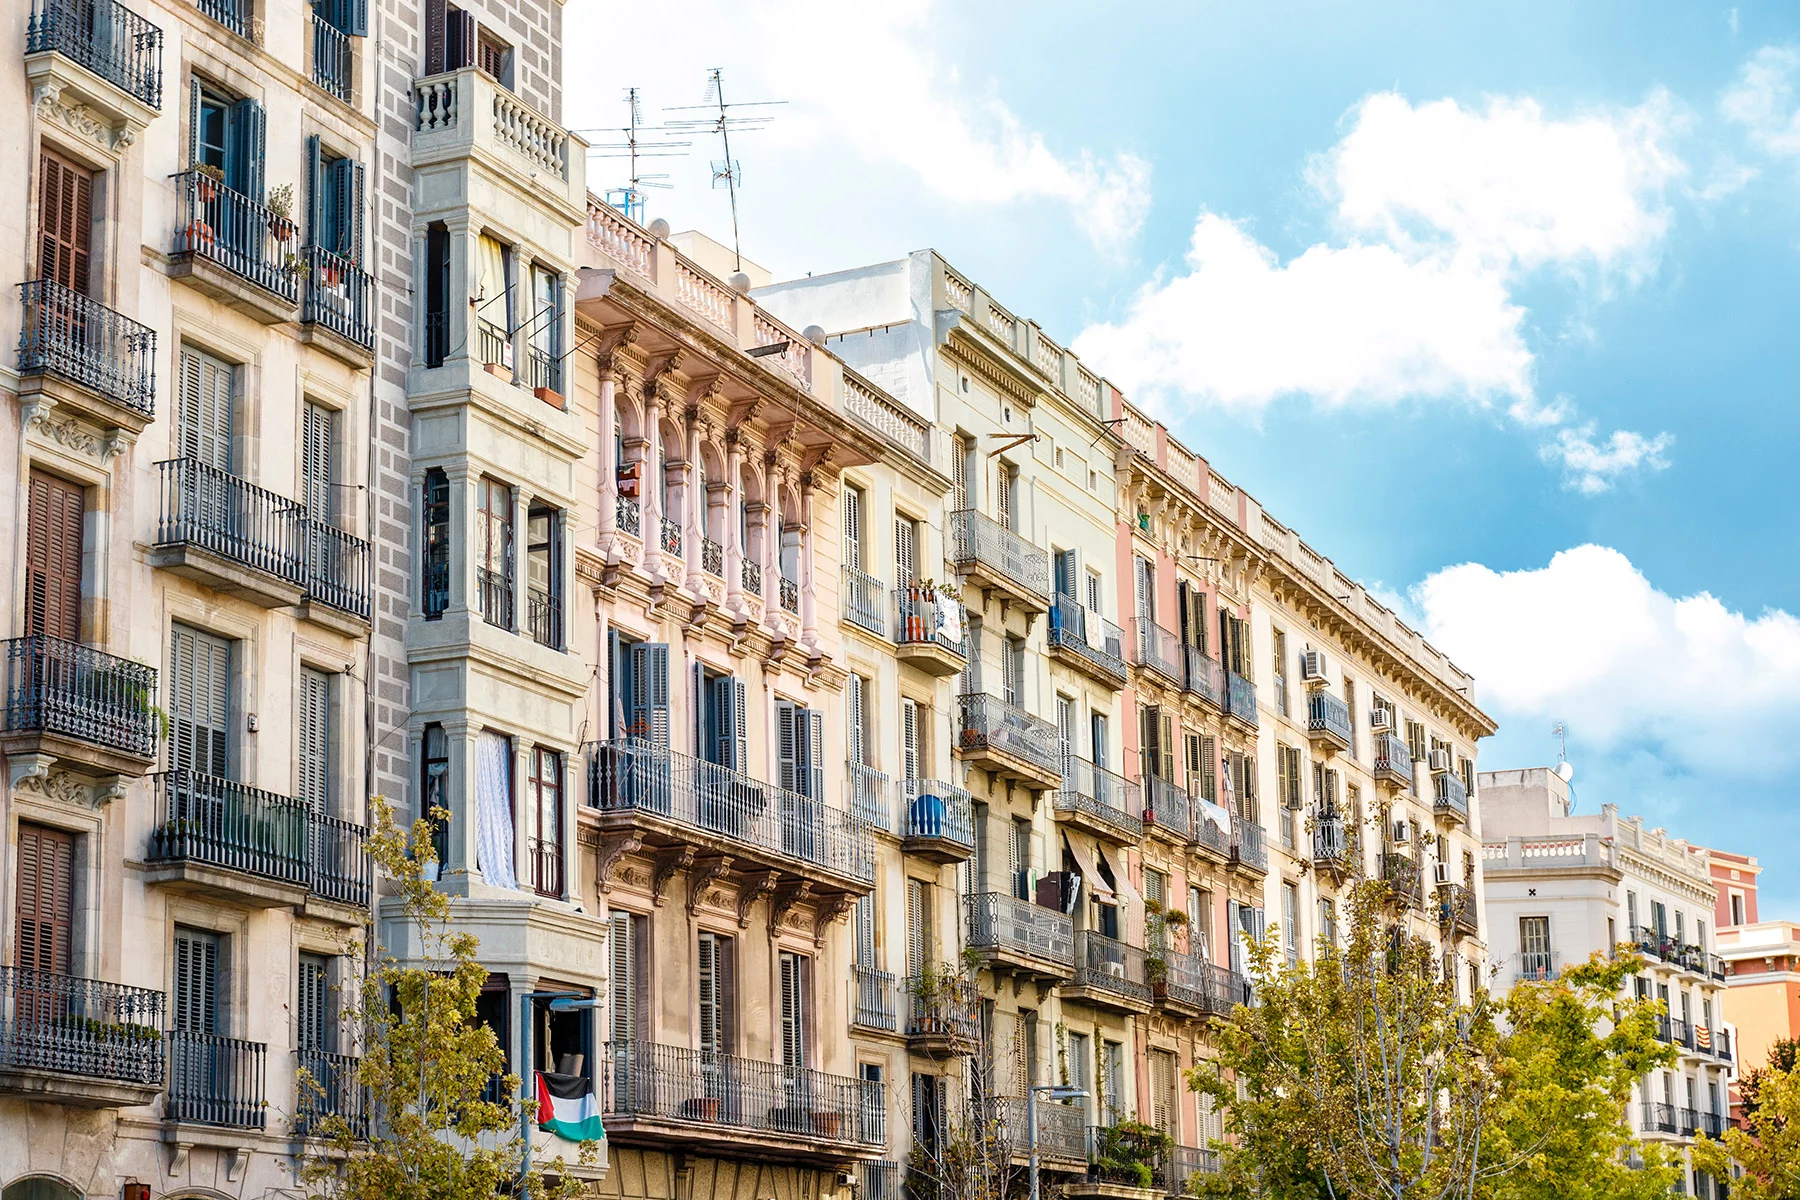 Old-fashioned apartment buildings in Barcelona